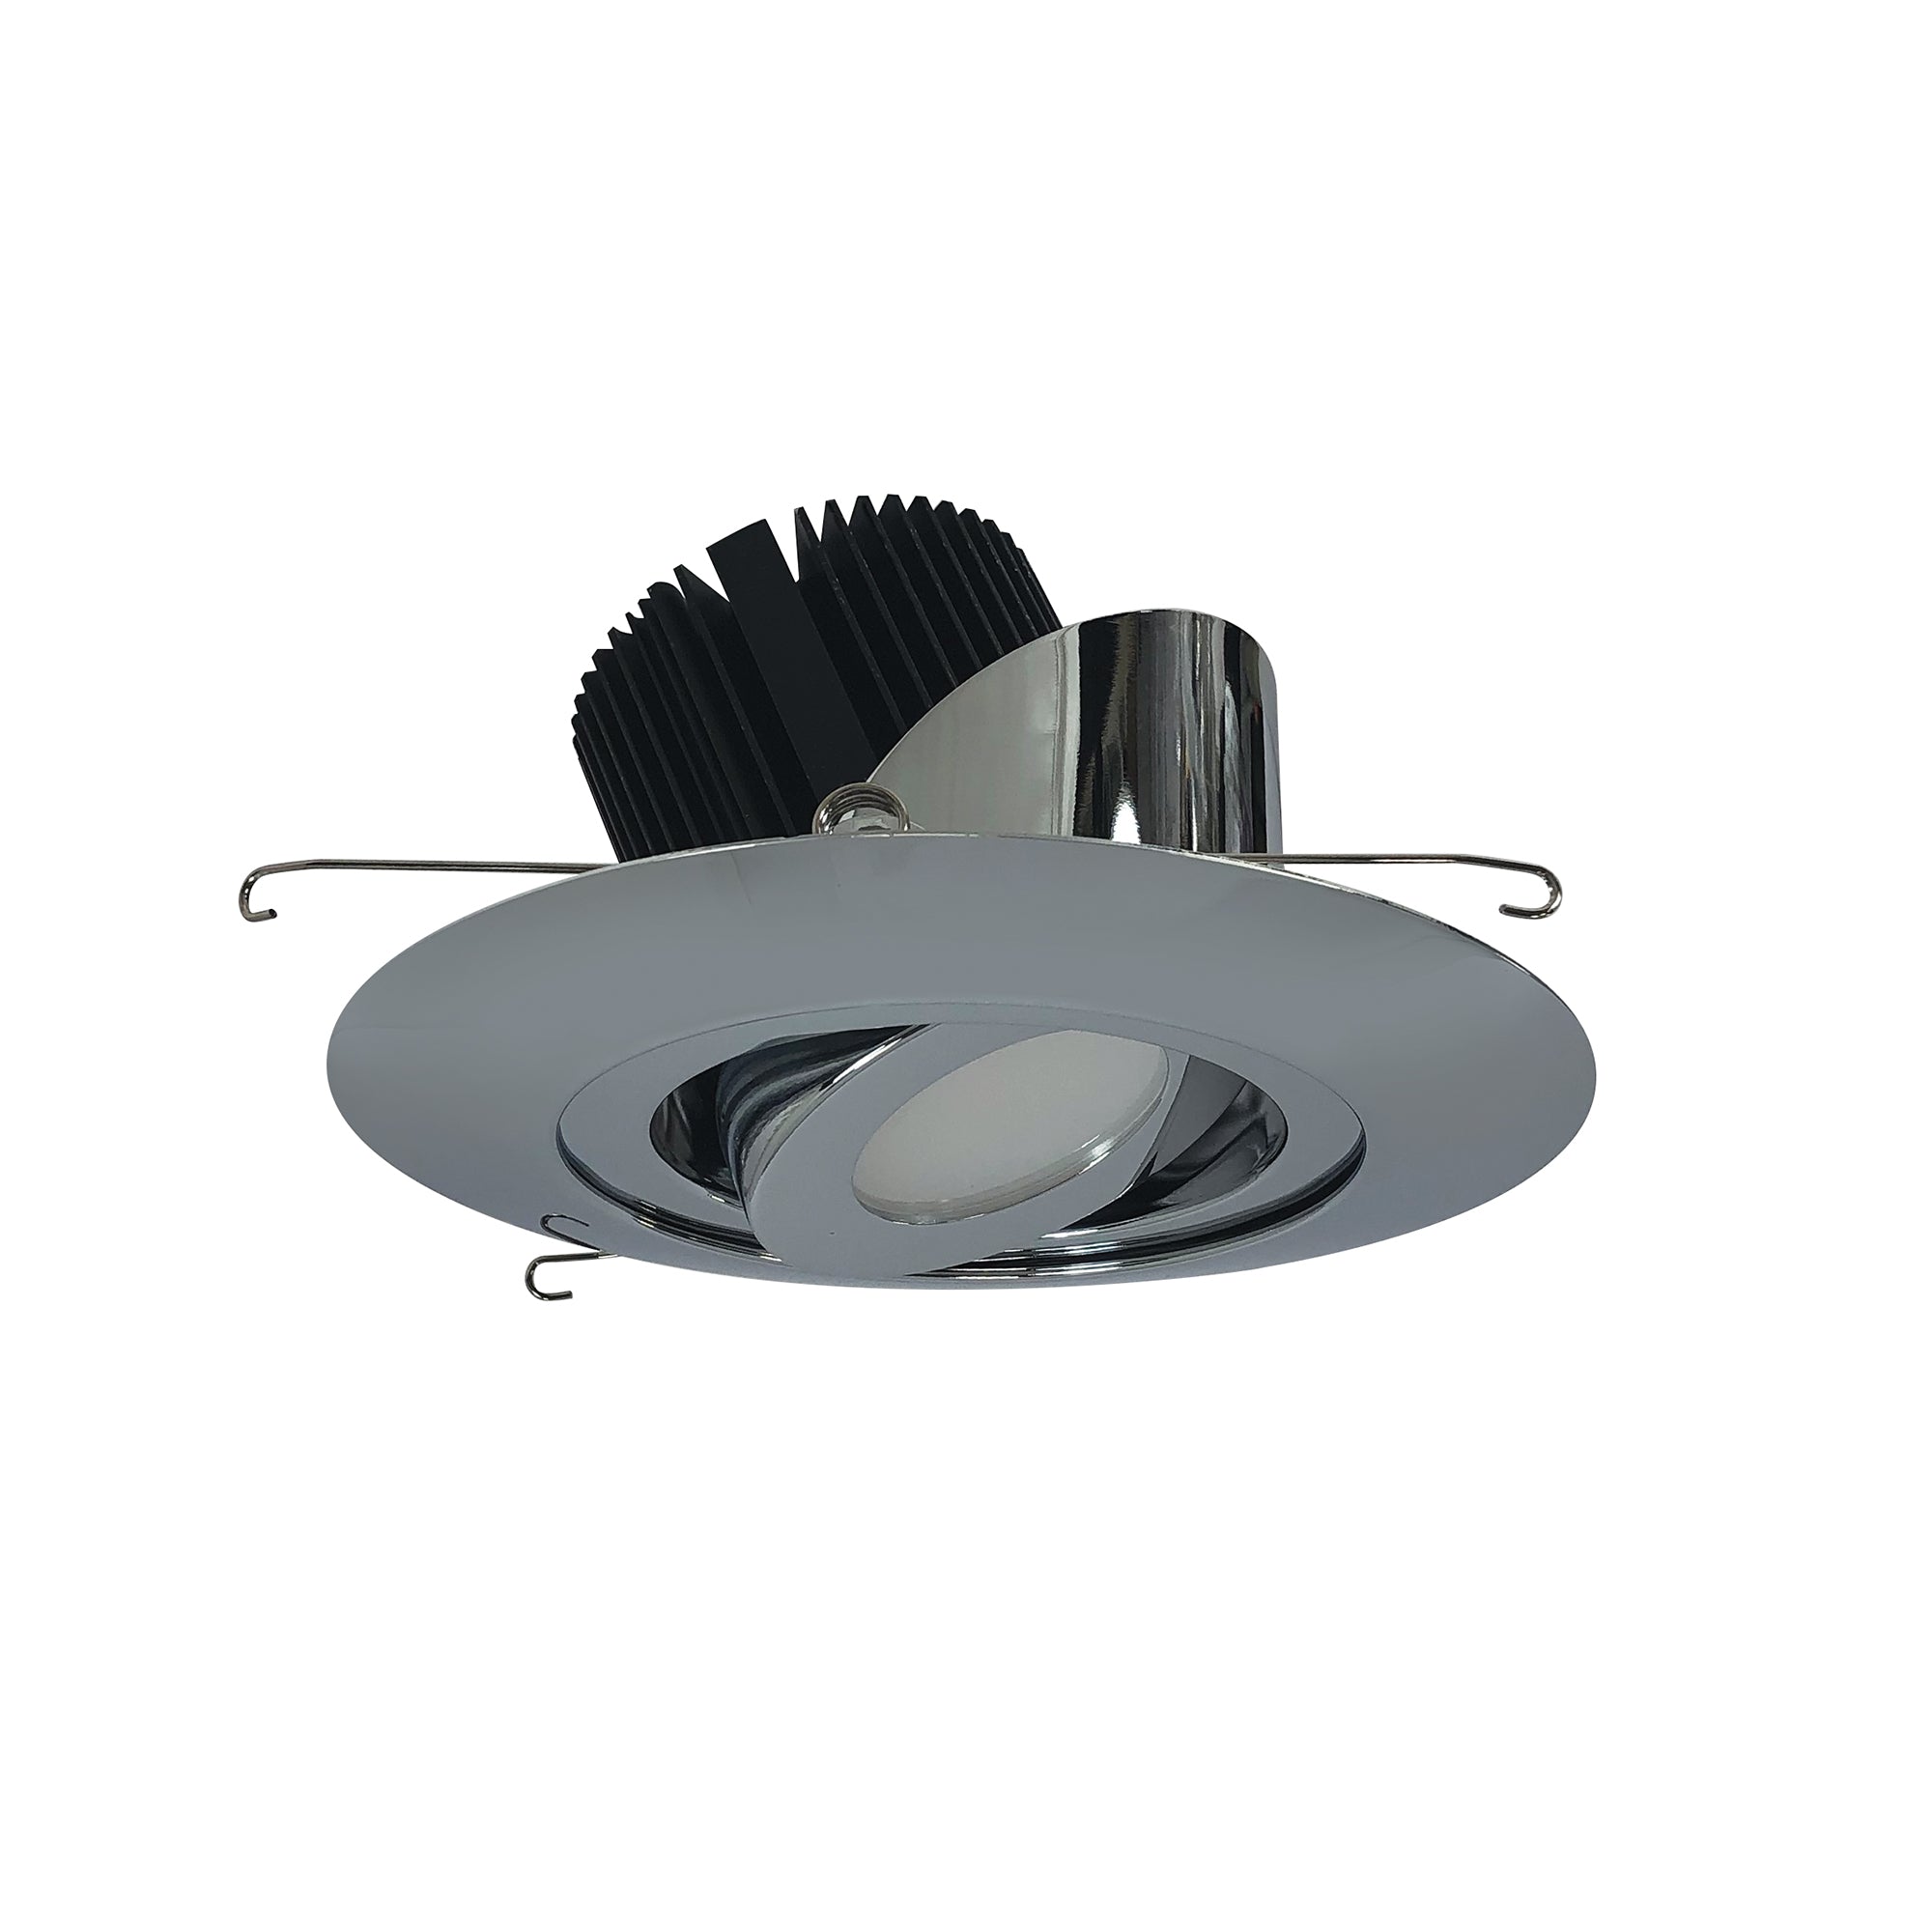 Nora Lighting NRM2-614L2535SC - Recessed - 6 Inch Marquise II Round Surface Adjustable Trim, Spot, 2500lm, 3500K, Chrome (Not Compatible with NHRM2-625 Housings)